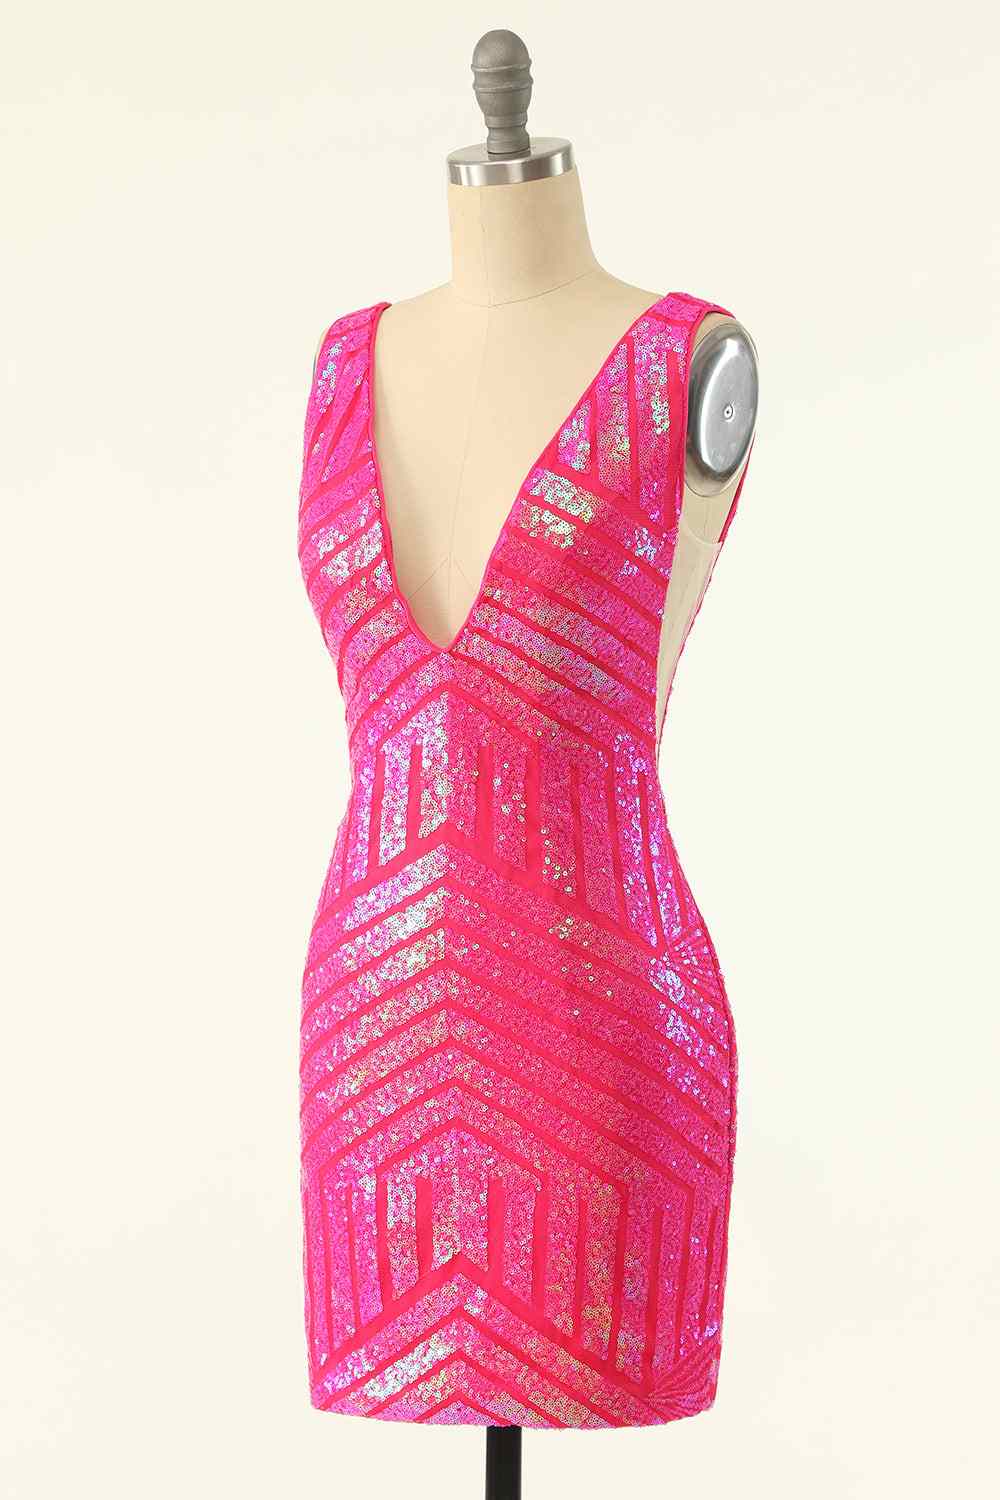 Hot Pink Sheath V Neck Sequin-Embroidered Mini Homecoming Dress